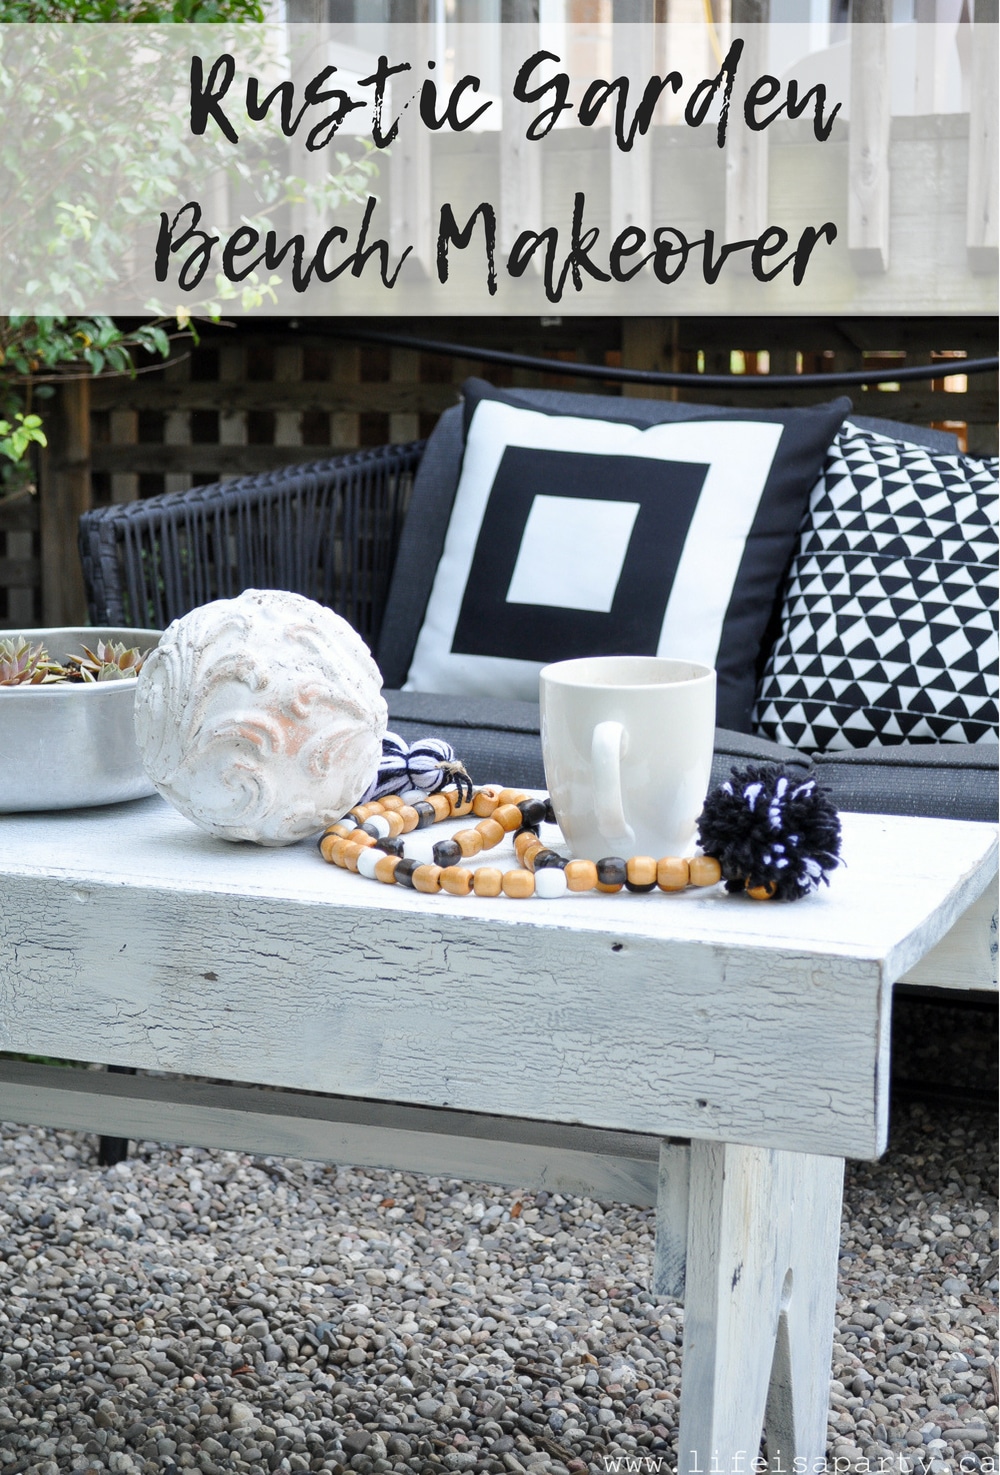 Rustic Garden Bench Painting Makeover: a wooden bench gets a rustic makeover with a crackle DIY paint finish to give it a antique look.